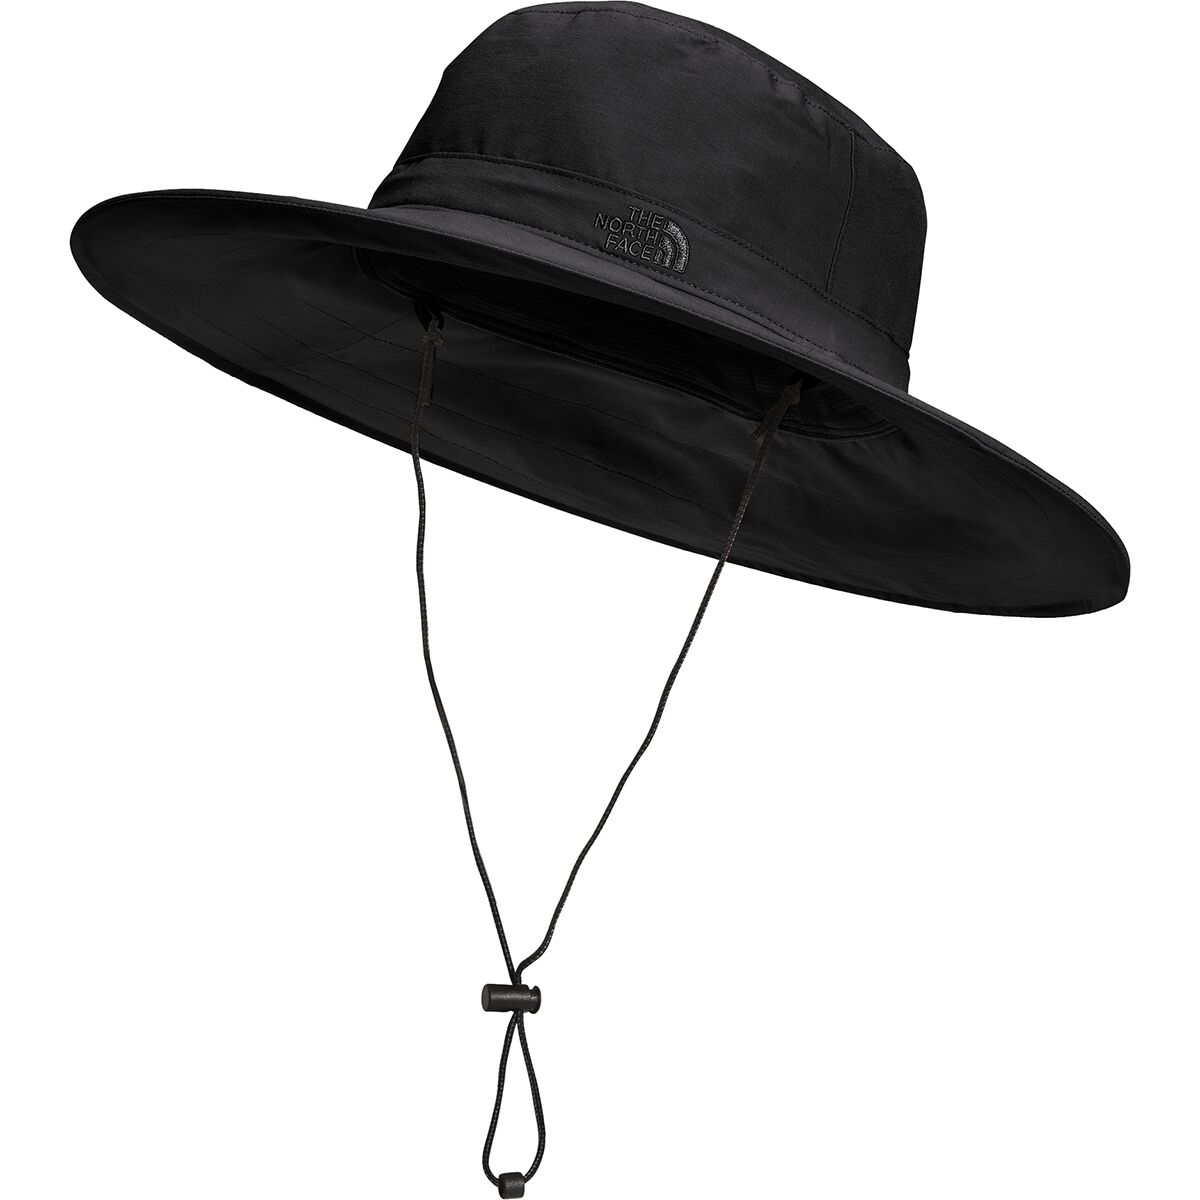 The North Face Class V Twist and Sun Brimmer Hat